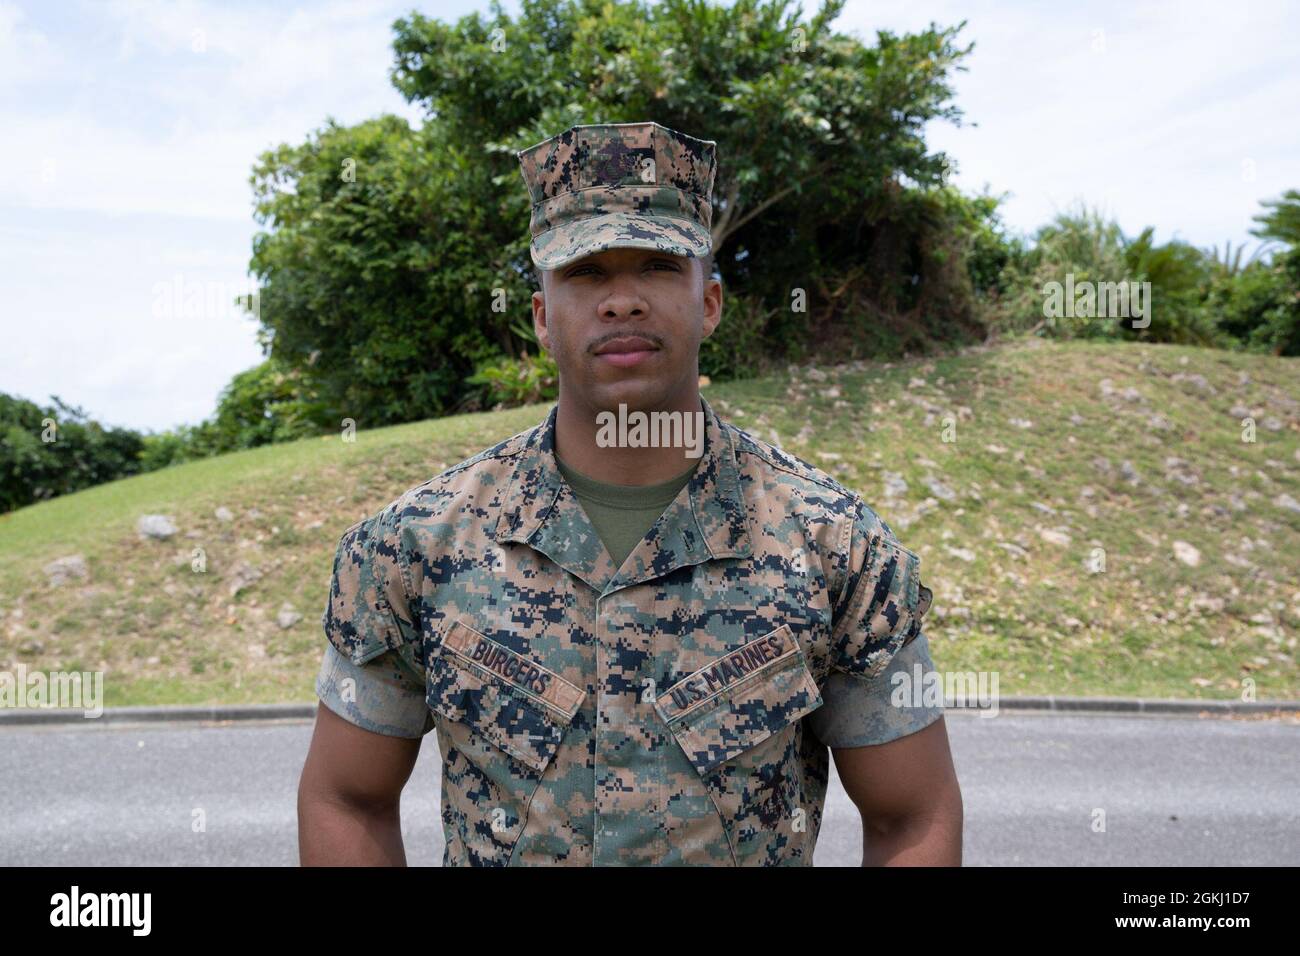 U.S. Marine Corps Lance Cpl. Skyler Burgers, an administrative clerk with 3rd Marine Expeditionary Brigade, poses for a photo on Camp Courtney, Okinawa, Japan, April 28, 2021.    “I got to Okinawa in June of 2019 I love Okinawa. Japan is such a nice place. My favorite thing to do here is eat, shop, and just drive around and get lost. I got to go mainland before COVID started and loved it there. Since restrictions are getting more relaxed, I’m looking forward to visiting mainland again.” Stock Photo